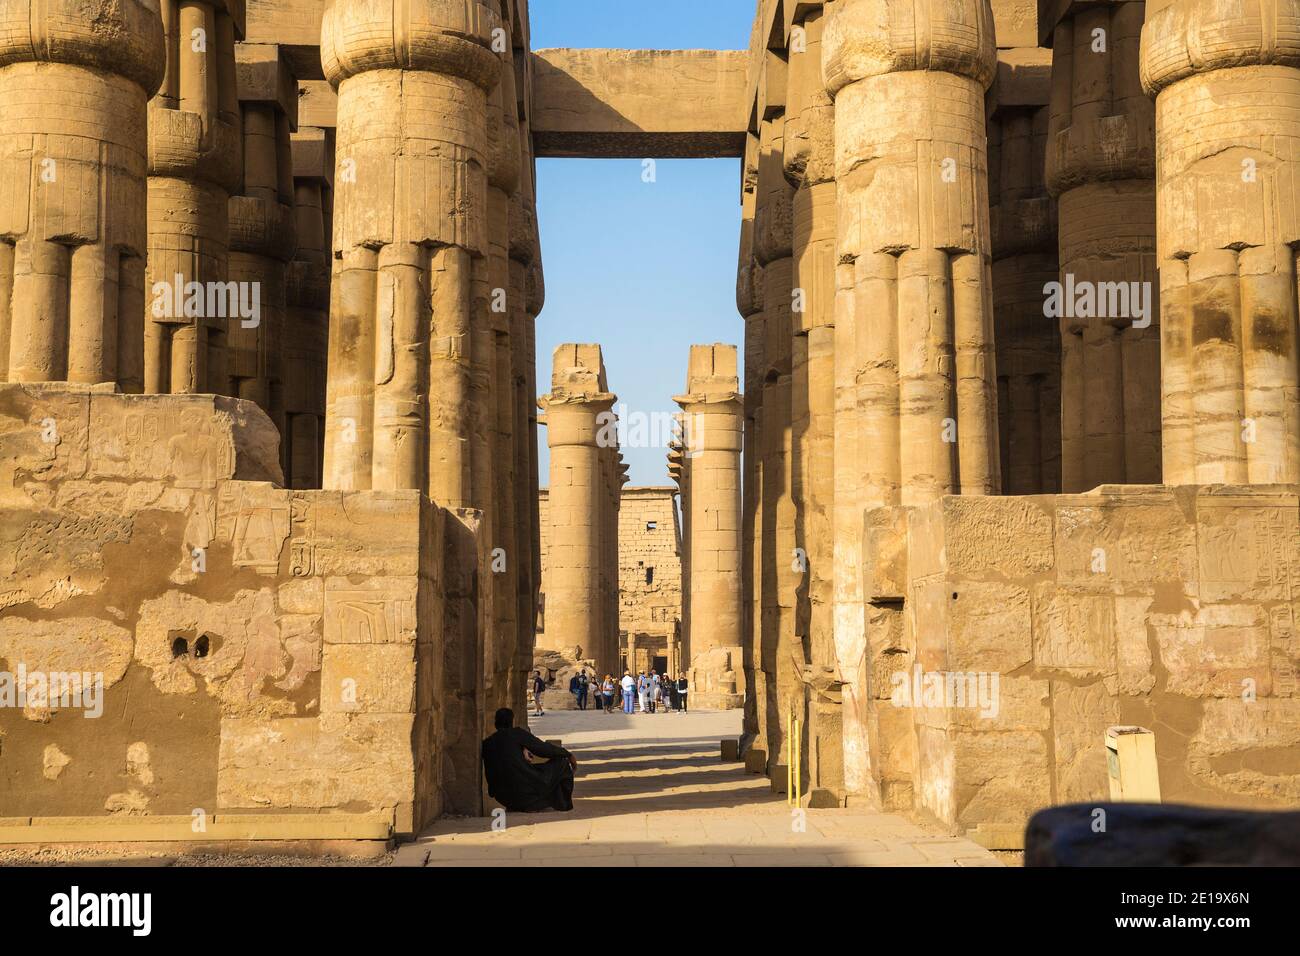 Egypt, Luxor, Luxor Temple, the Great colonnade of Amenophis 11 Stock Photo